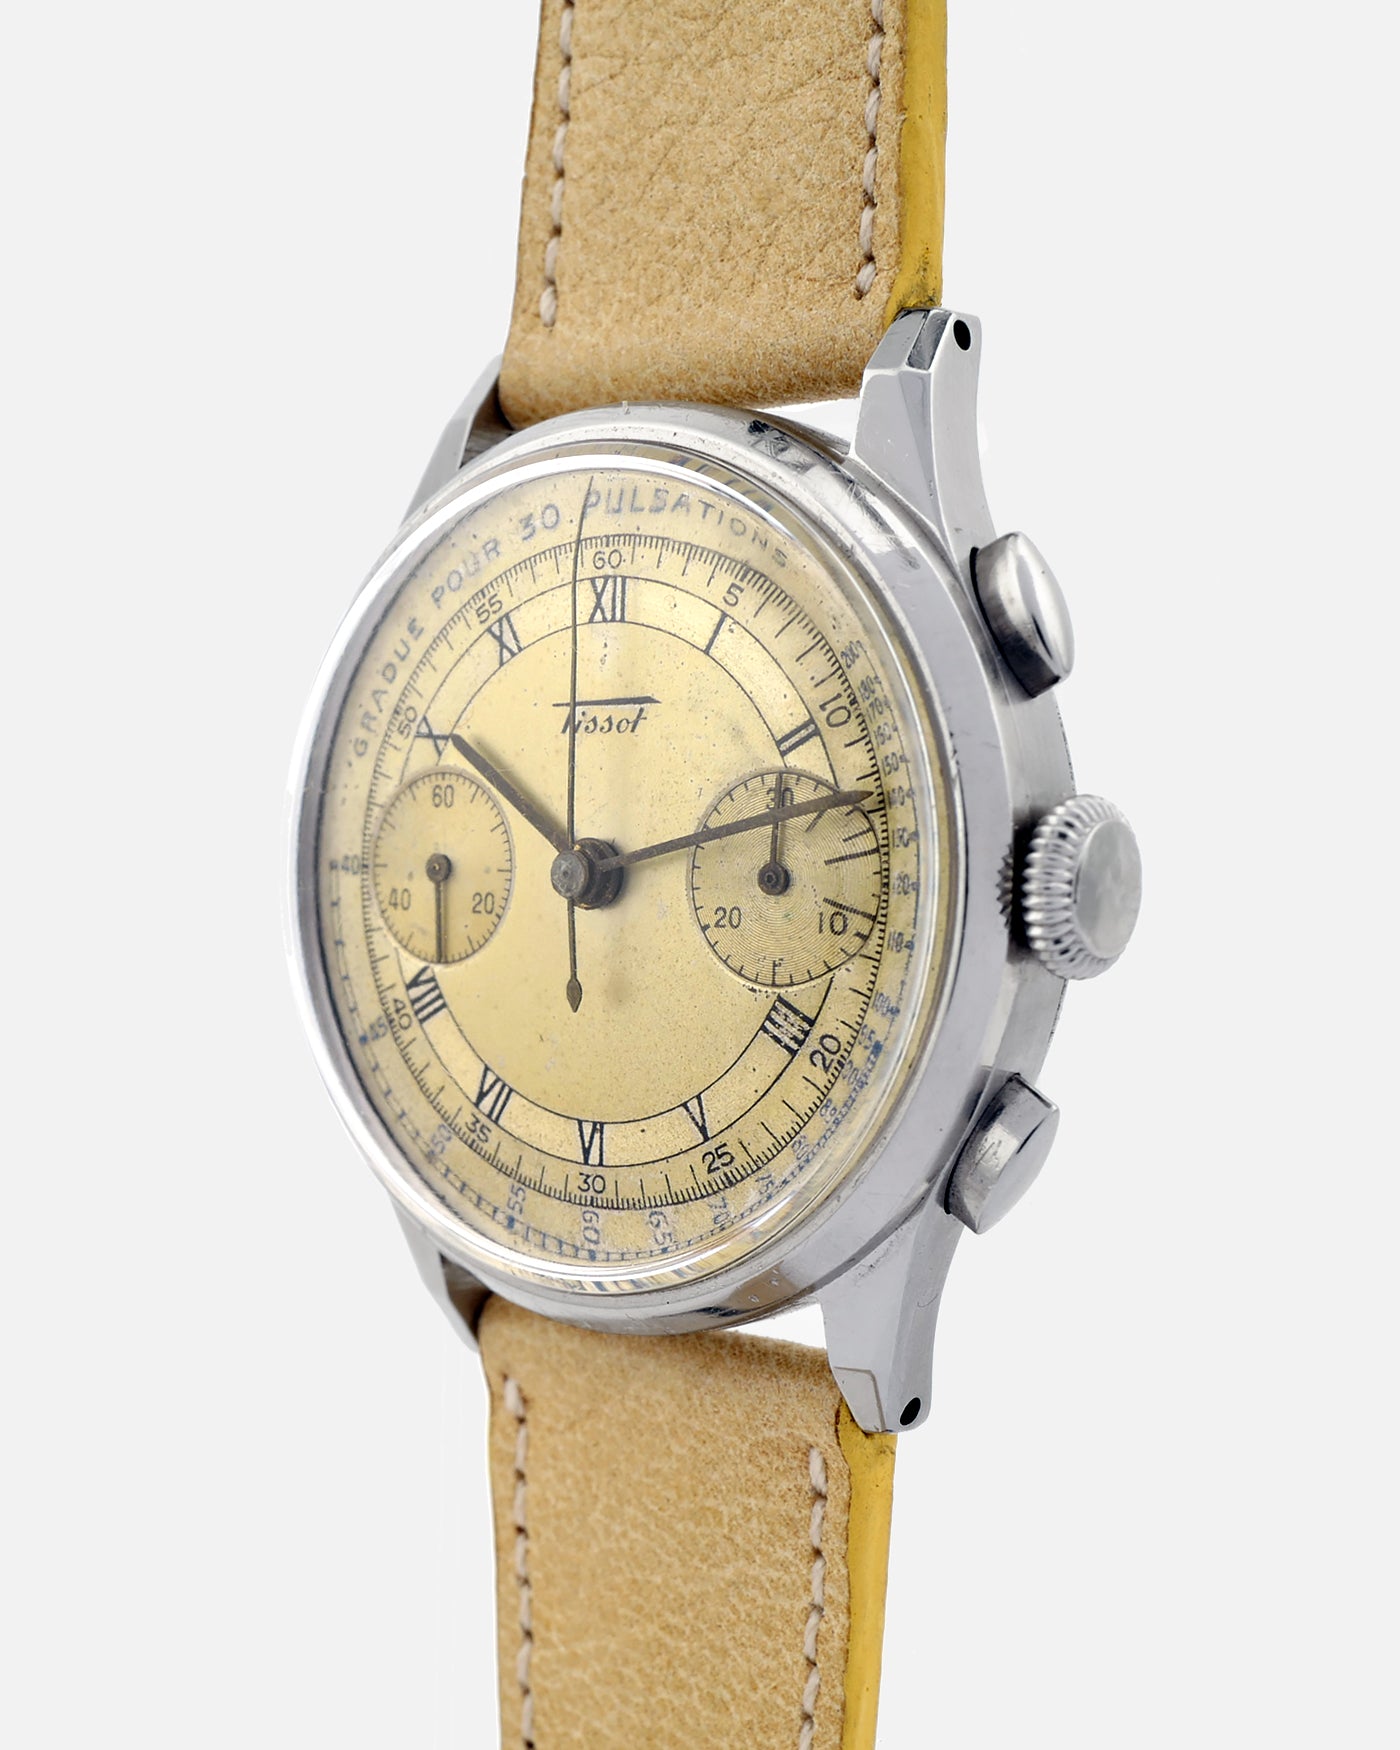 1940s Tissot Chronograph 15TL / 33.3 | Pulsations Dial | Two-Tone Dial | Rare Faceted Lugs | Unique Roman and Arabic Numbers